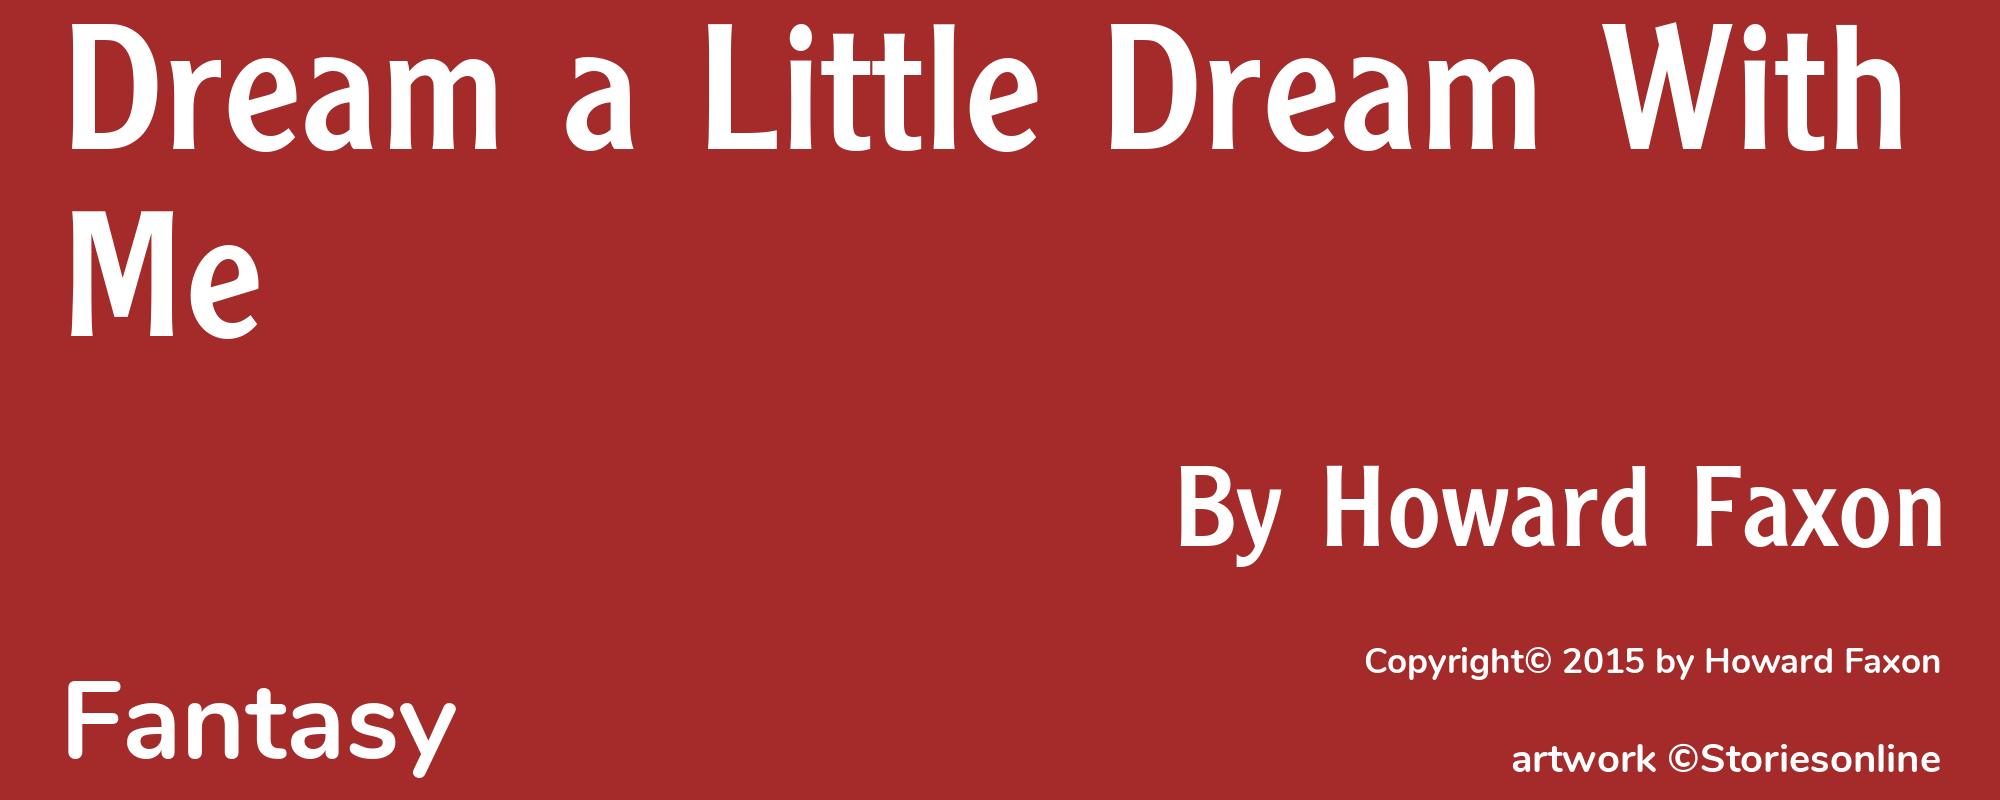 Dream a Little Dream With Me - Cover